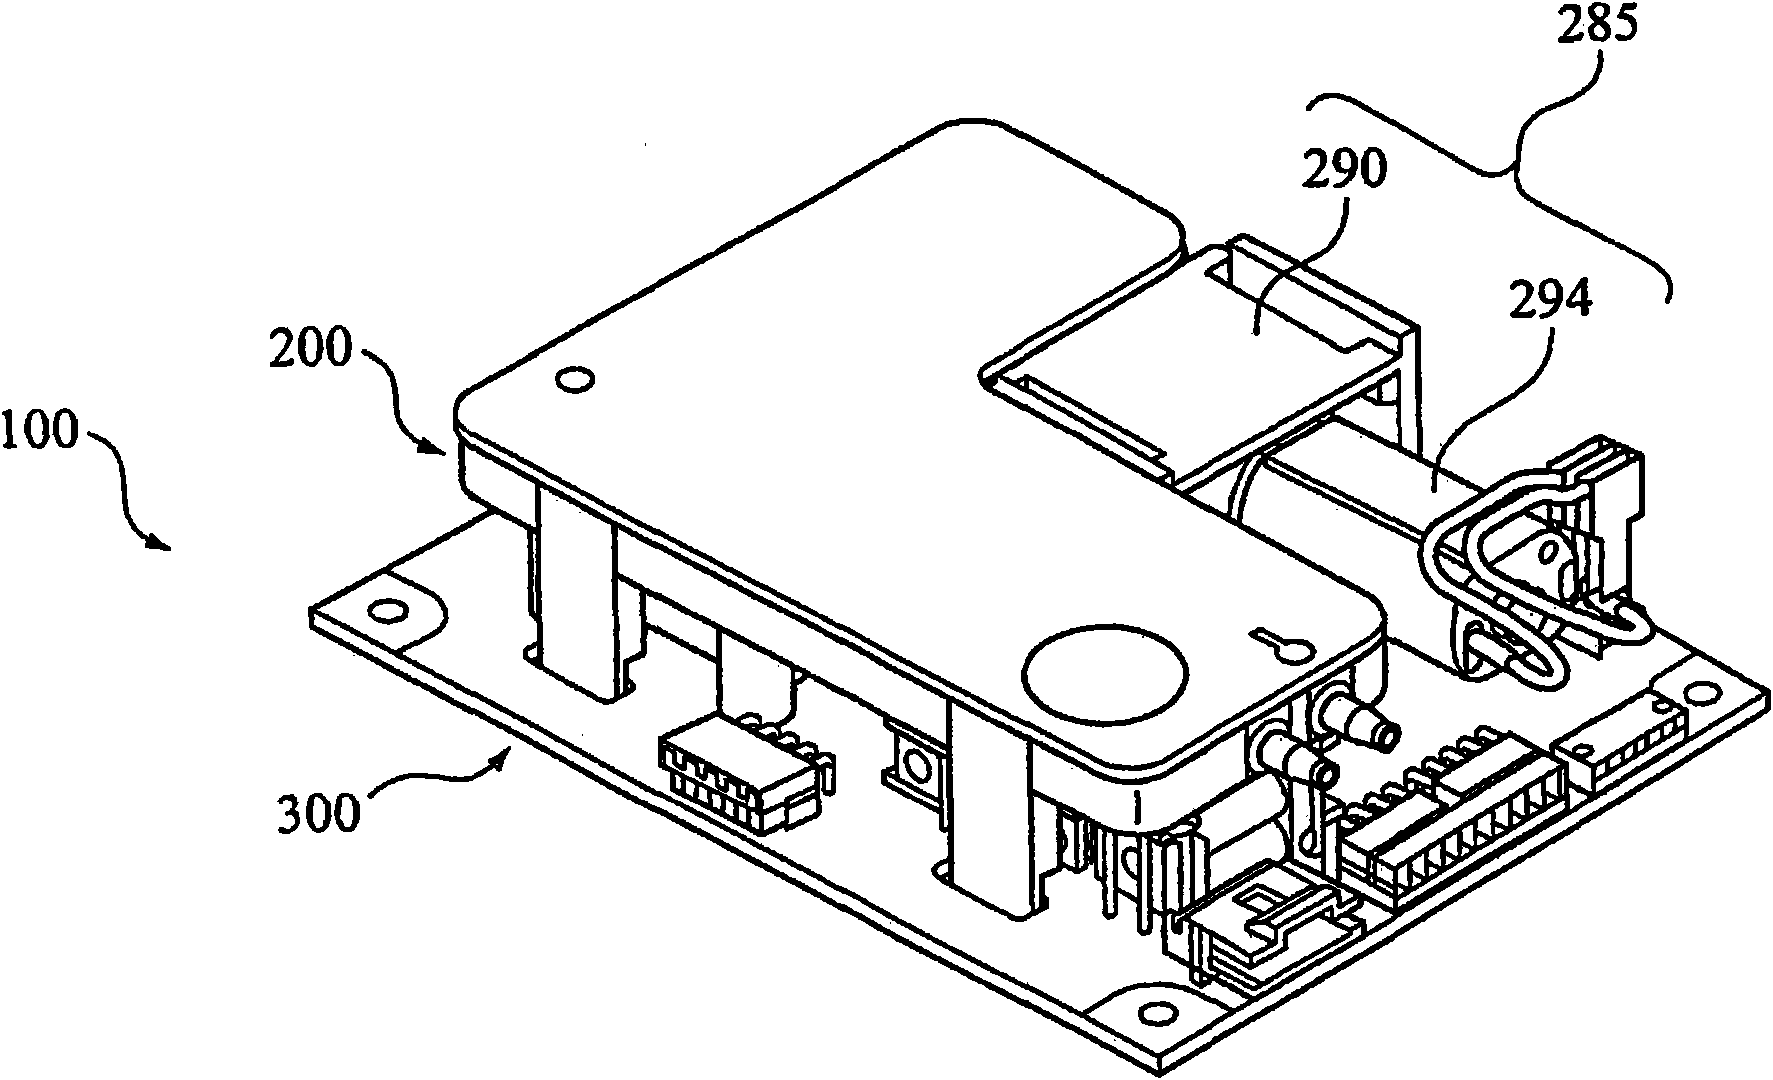 Electro-pneumatic assembly for use in a respiratory measurement system